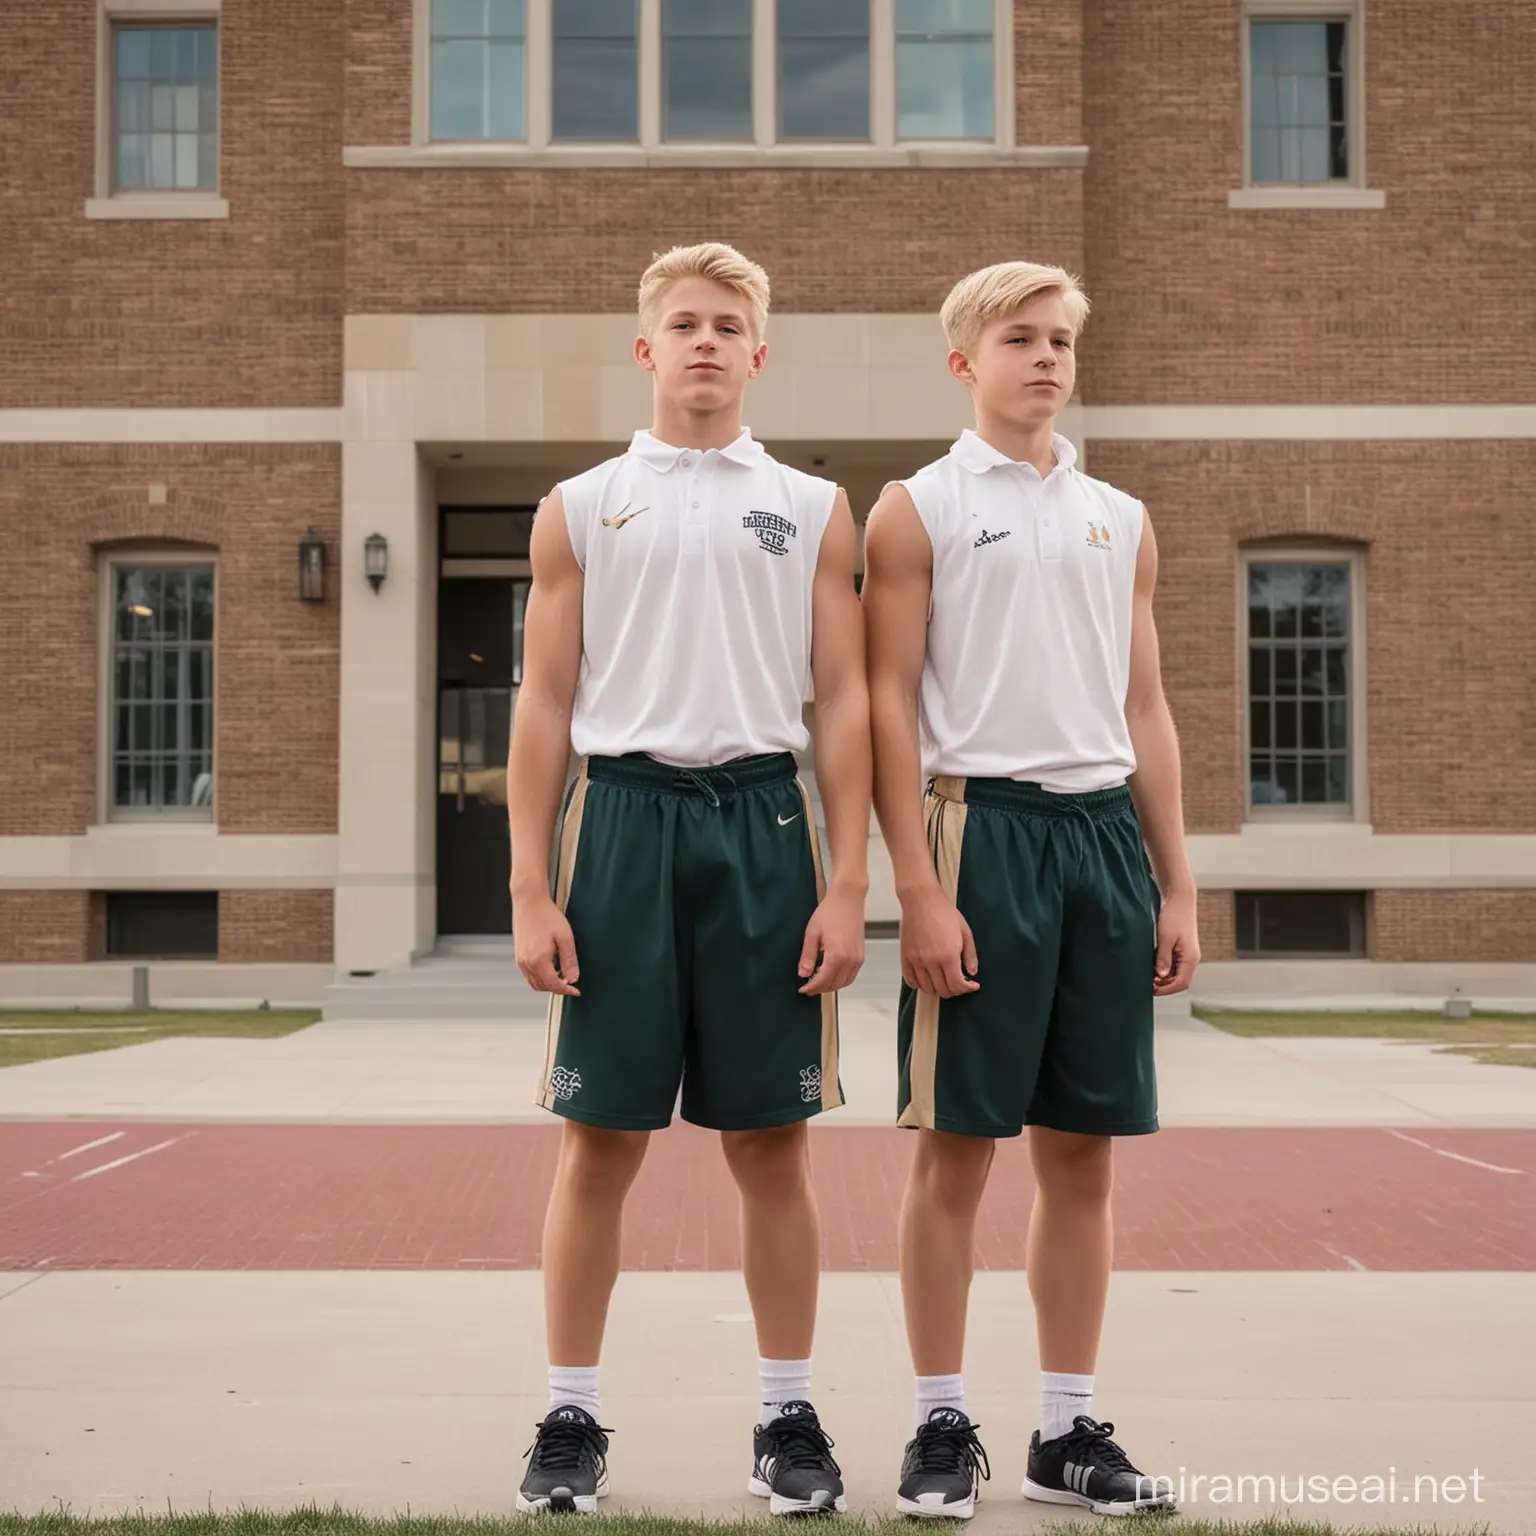 Athletic Blond Brothers Standing in Front of School Building